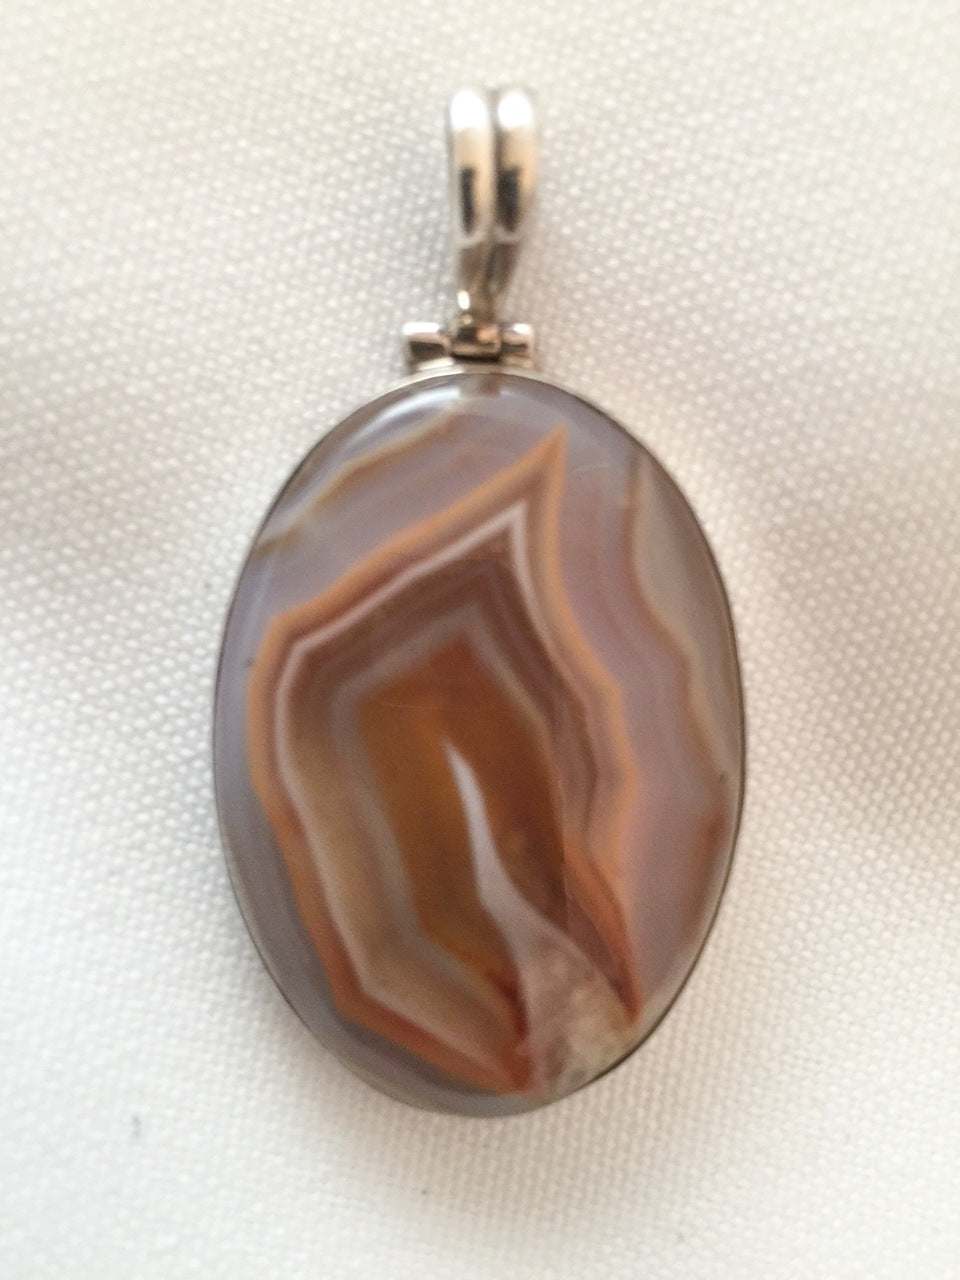 Agate Pendant set in Sterling Silver w Grey/Peach/Ivory Colors